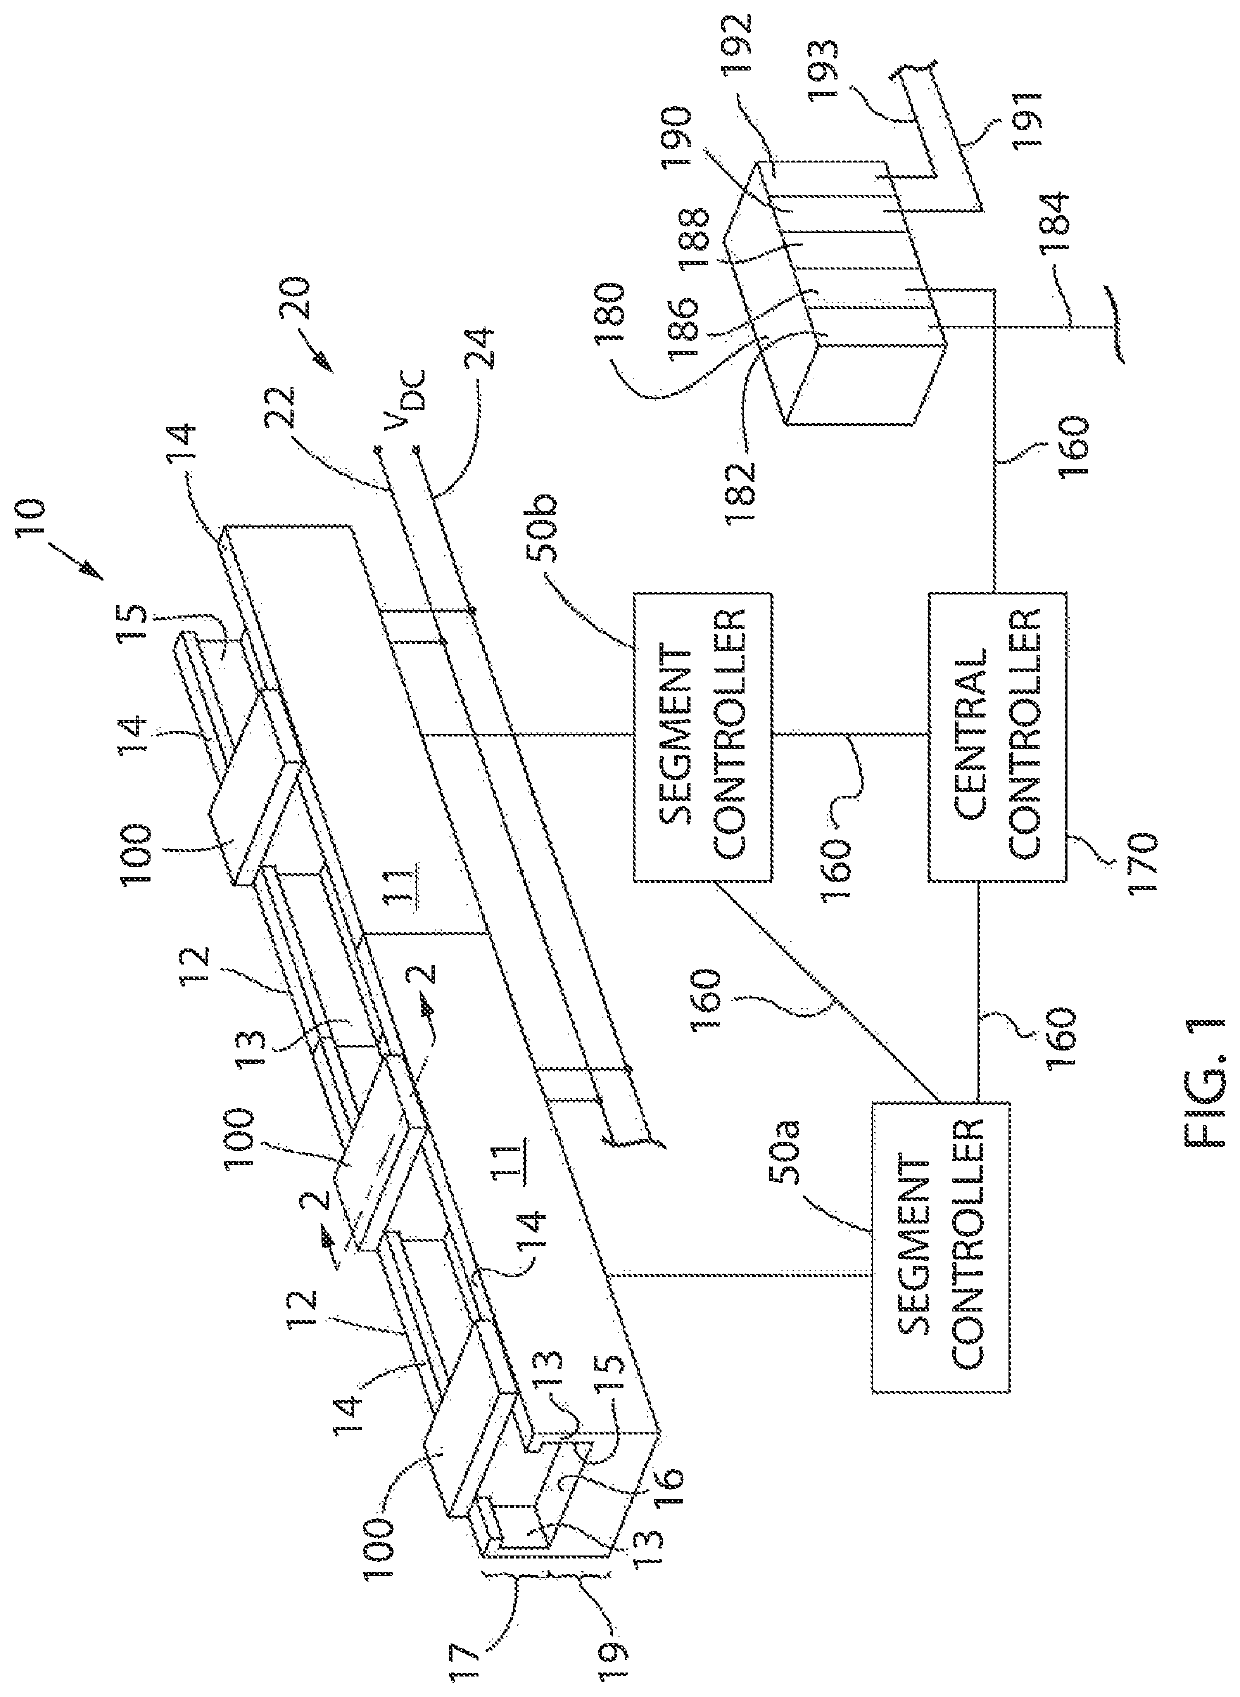 System and method for improving travel across joints in a track for a linear motion system